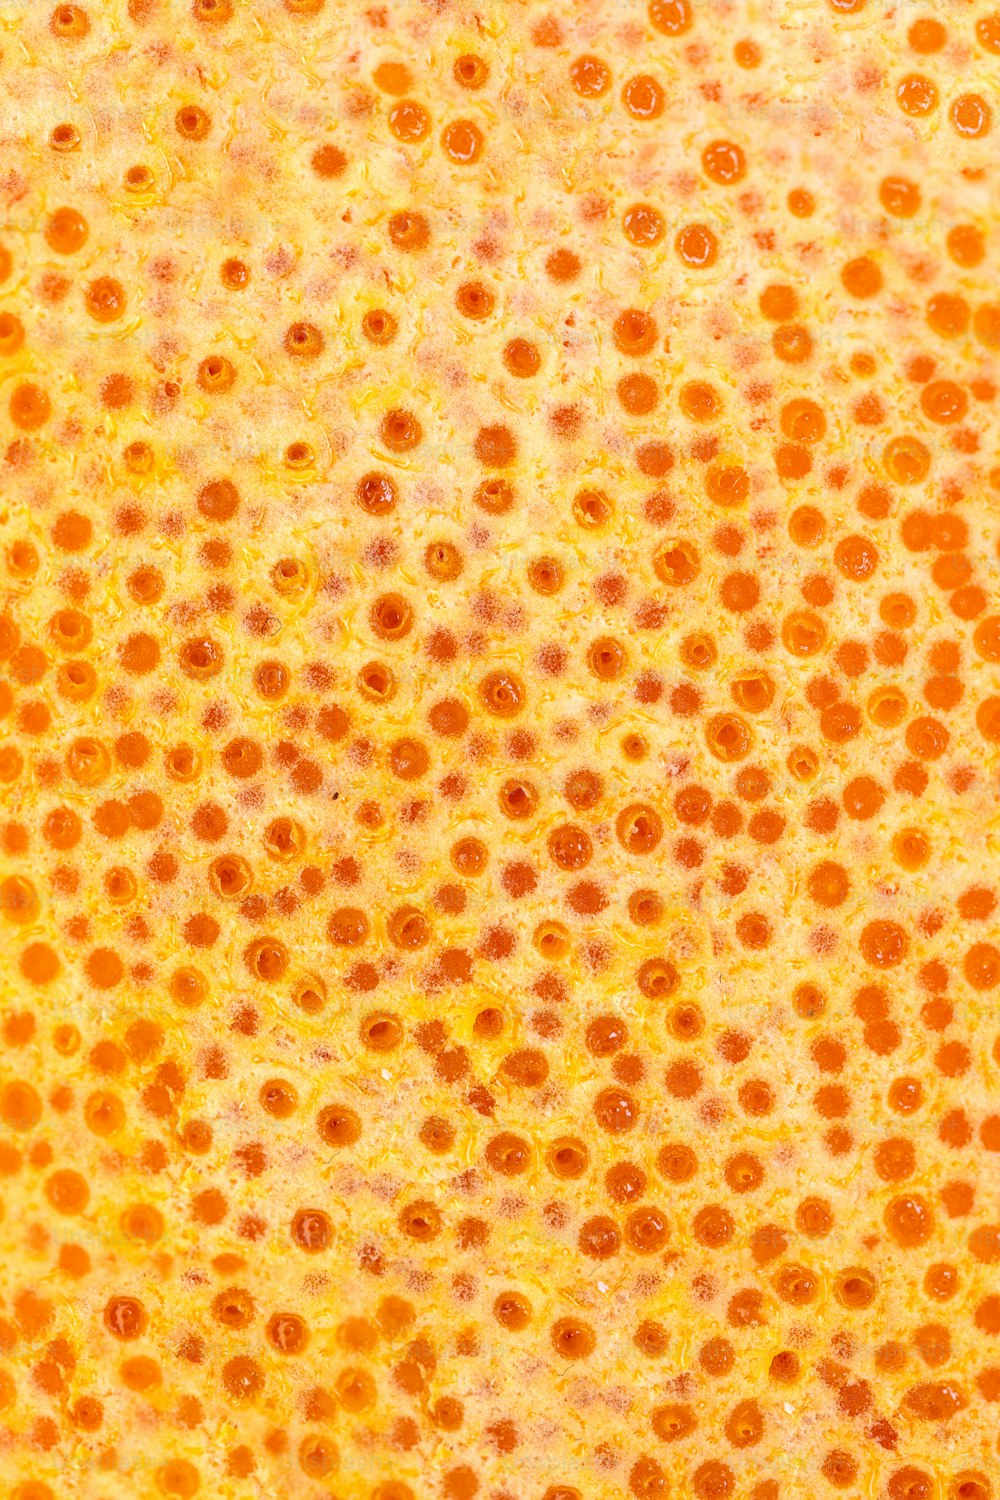 a close up of an orange and yellow background